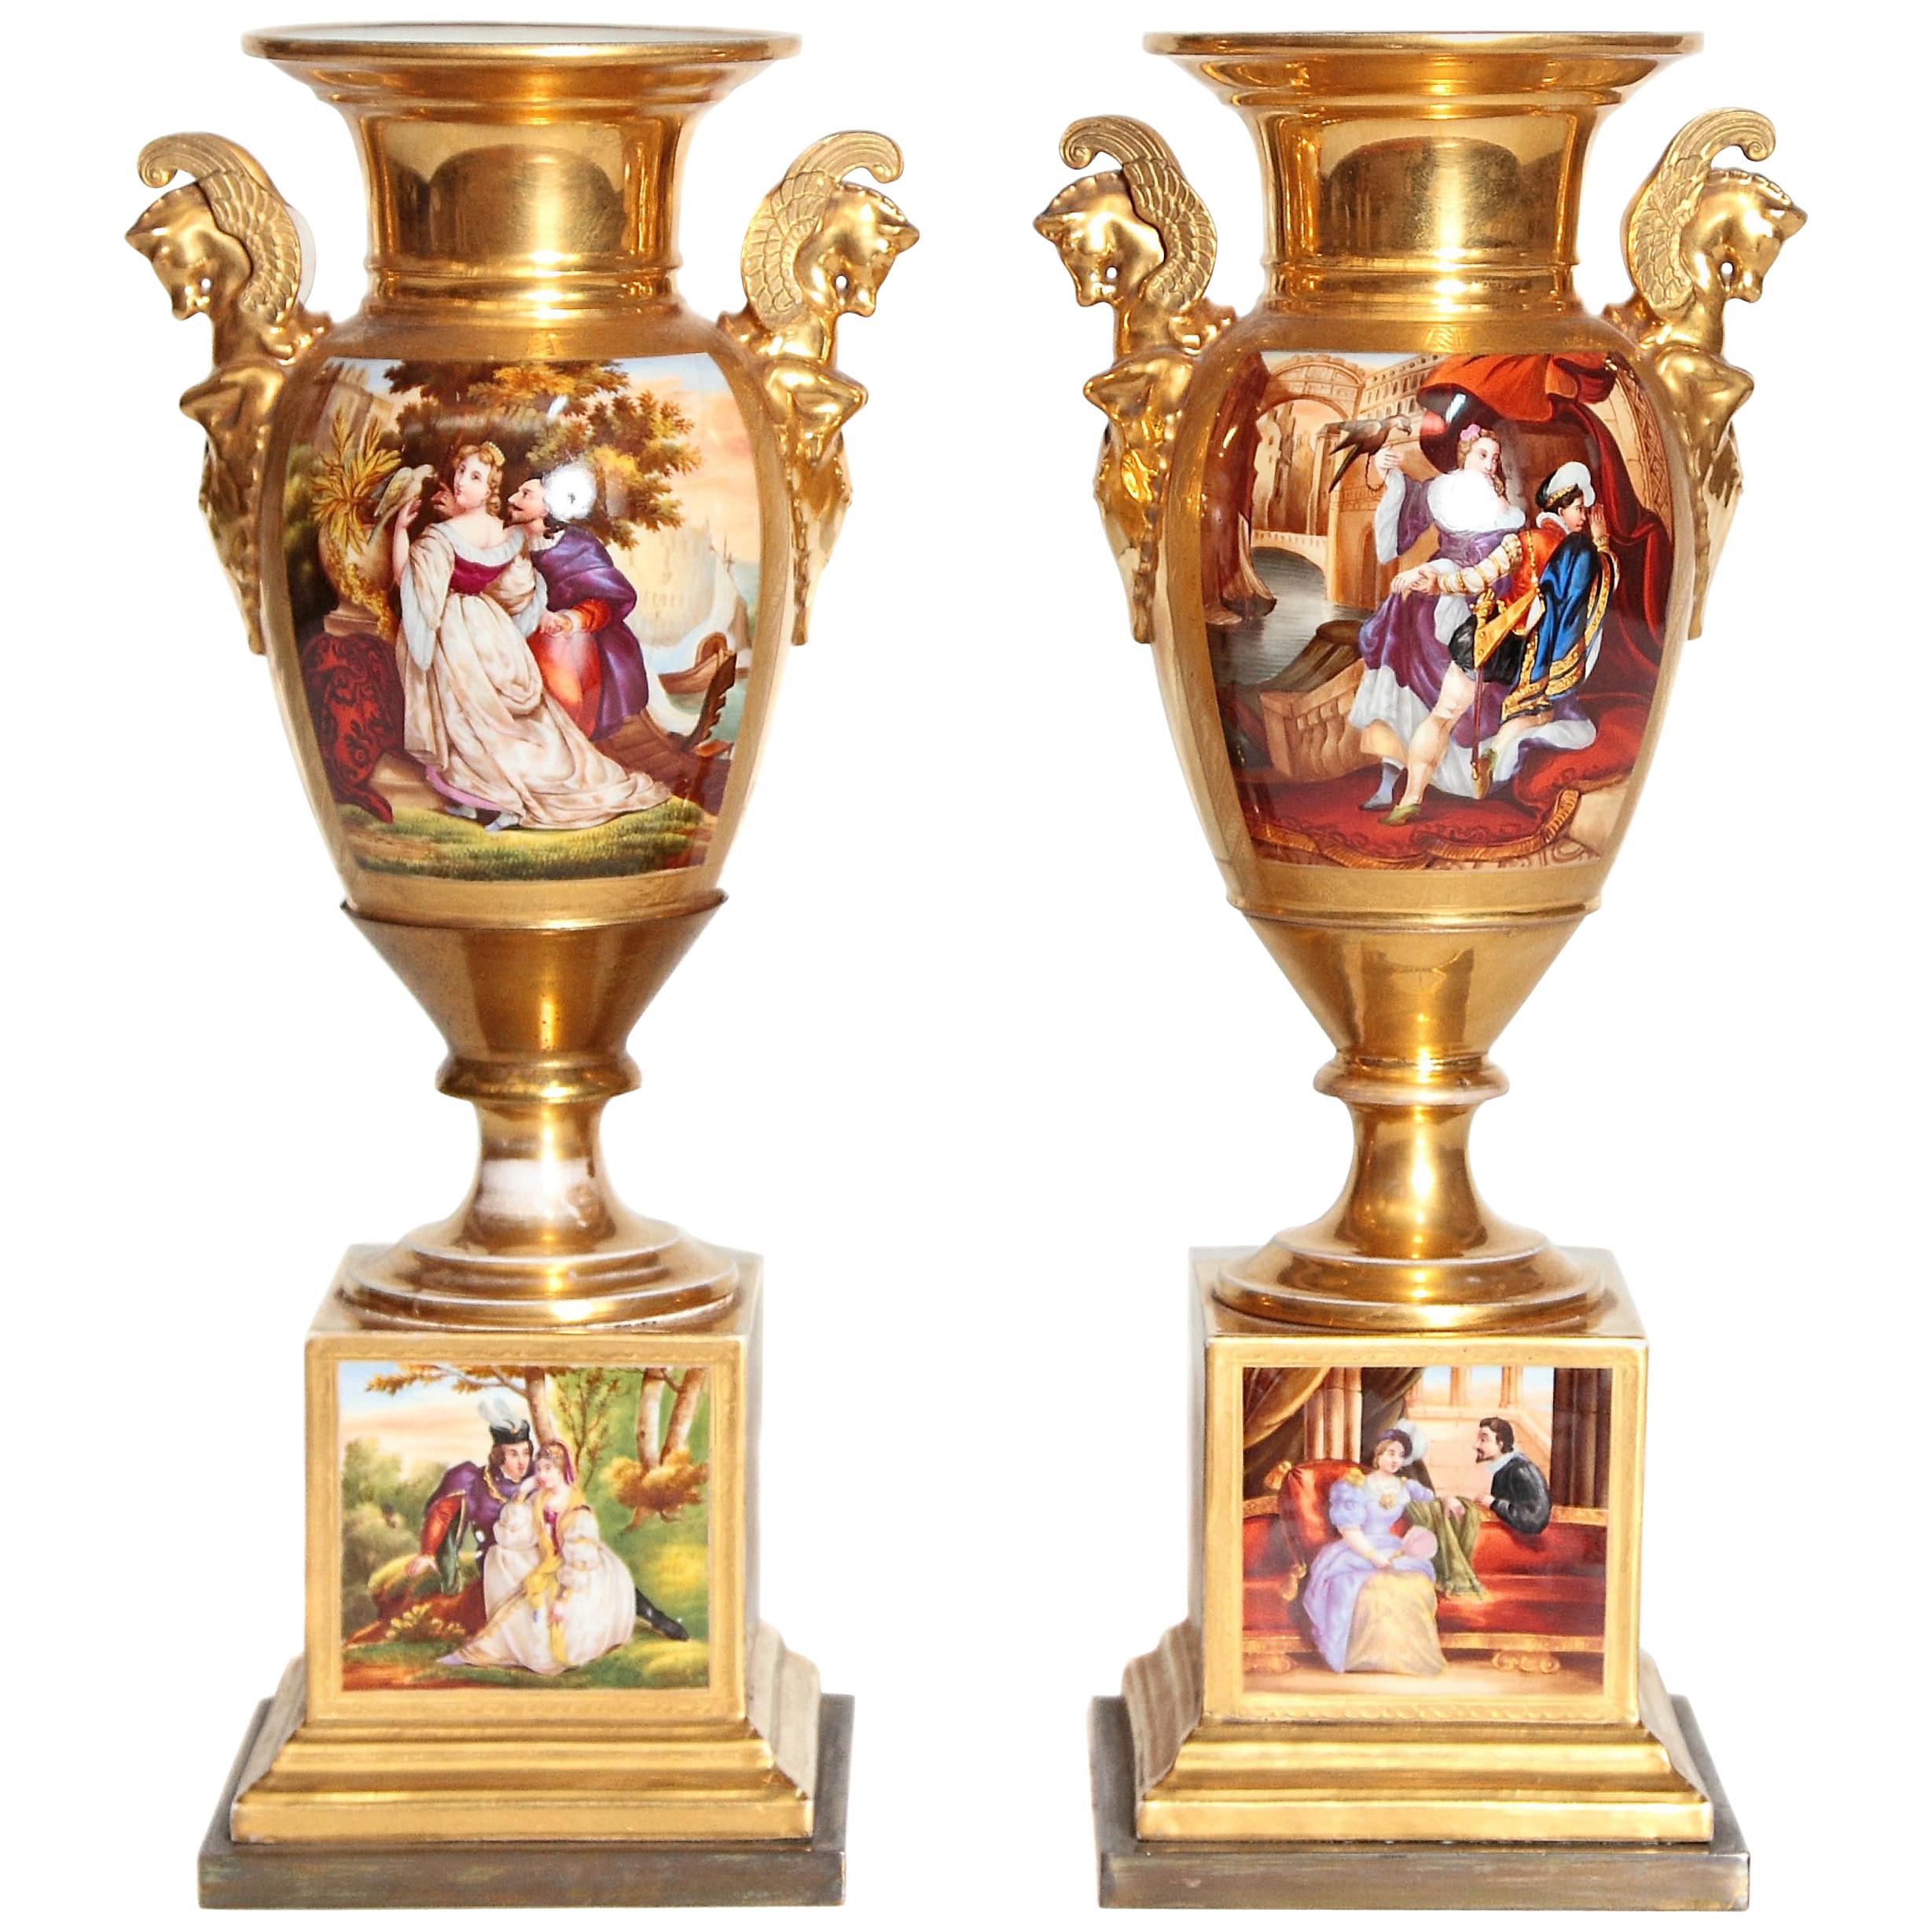 19th Century Pair of French Porcelain Gilt Urns with Scenes